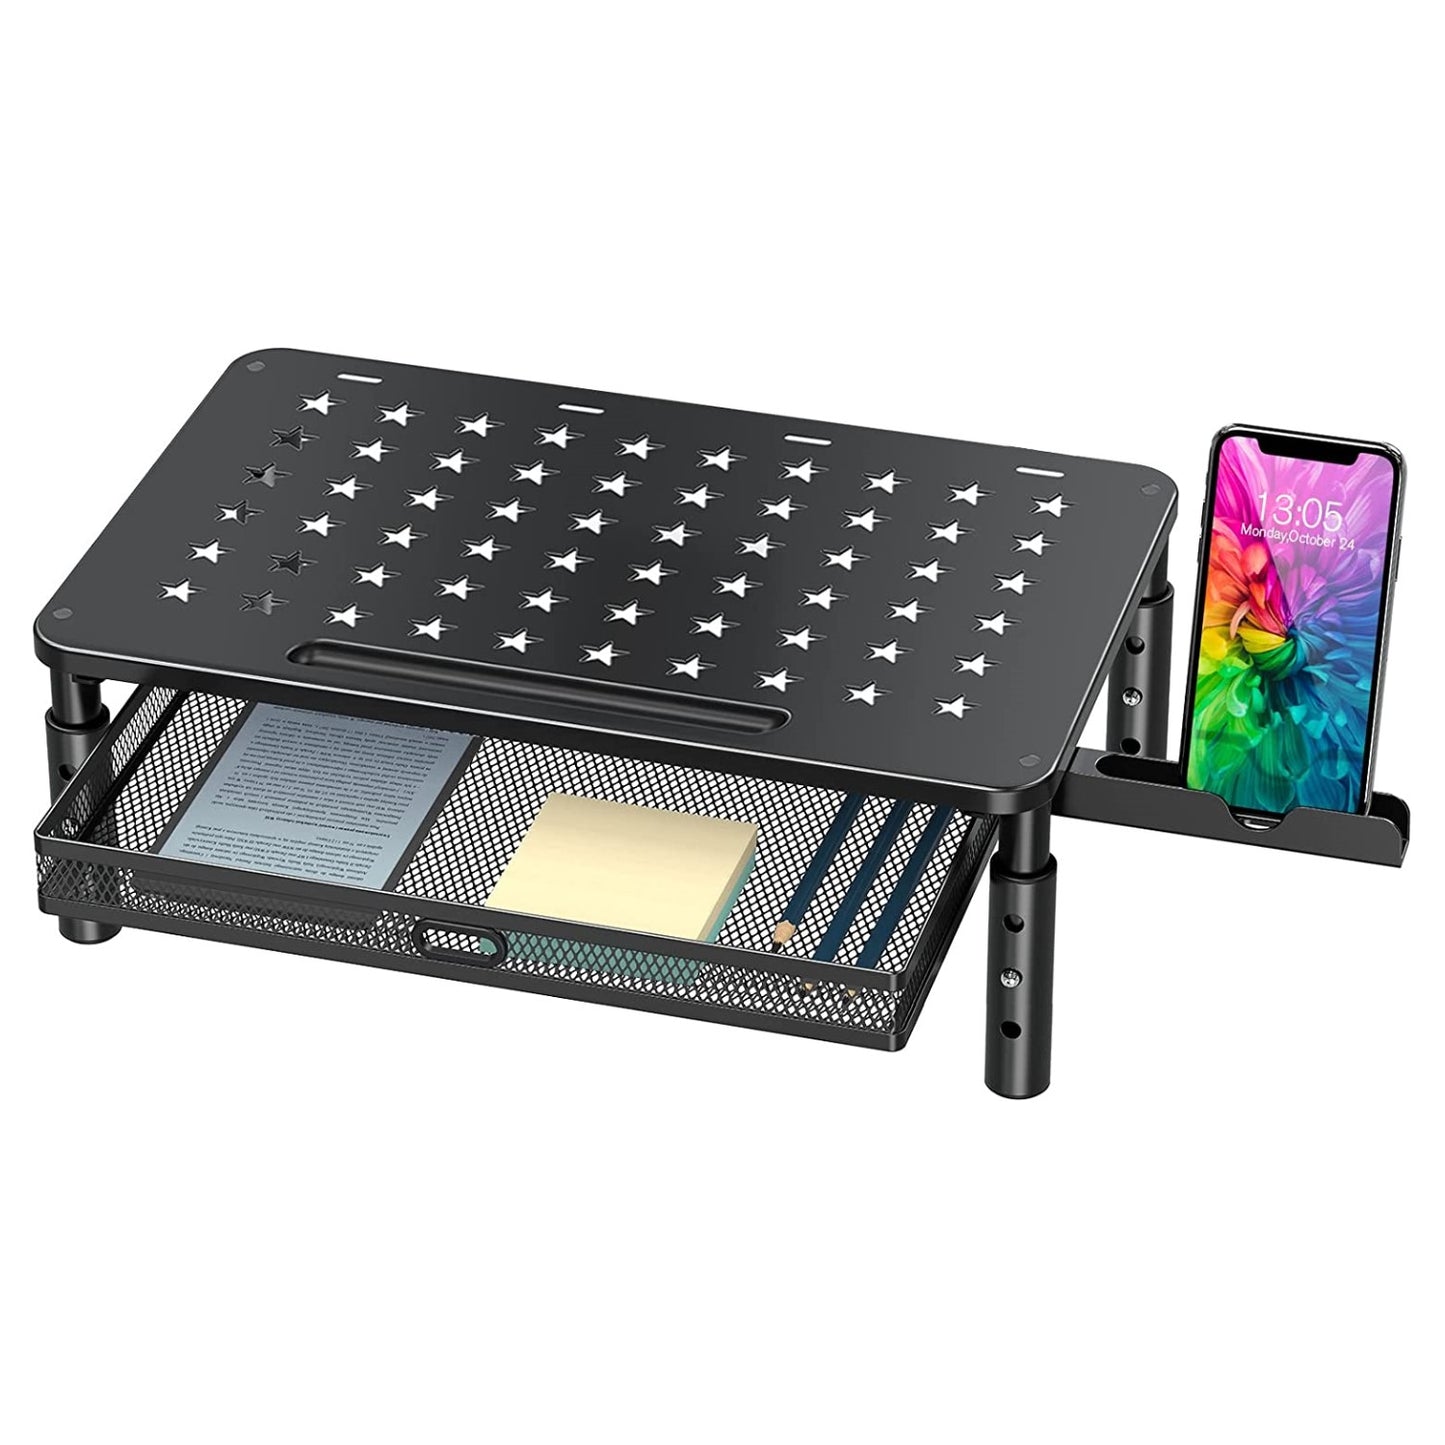 Zimilar monitor stand with drawer